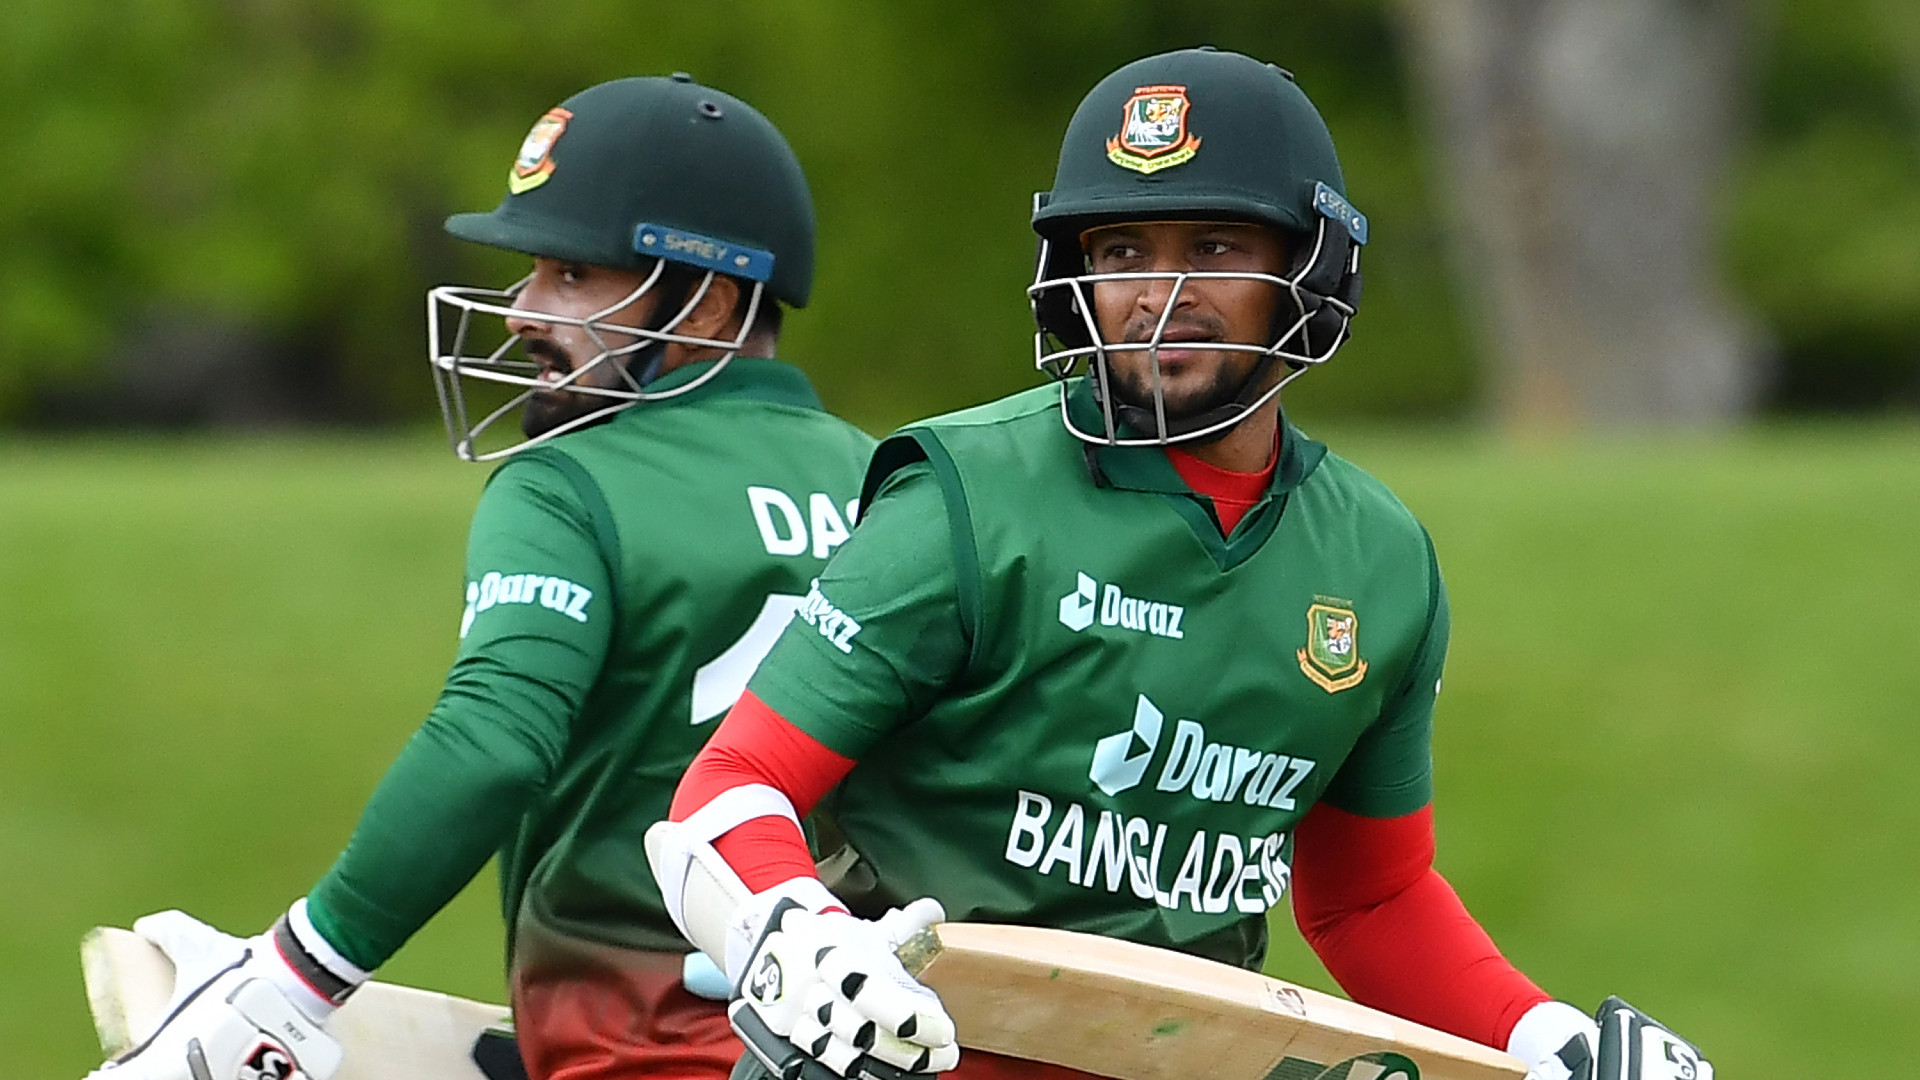 Bangladesh Cricket Board has refused to give a No Objection Certificate (NOC) to Shakib Al Hasan and Liton Das for Indian Premier League